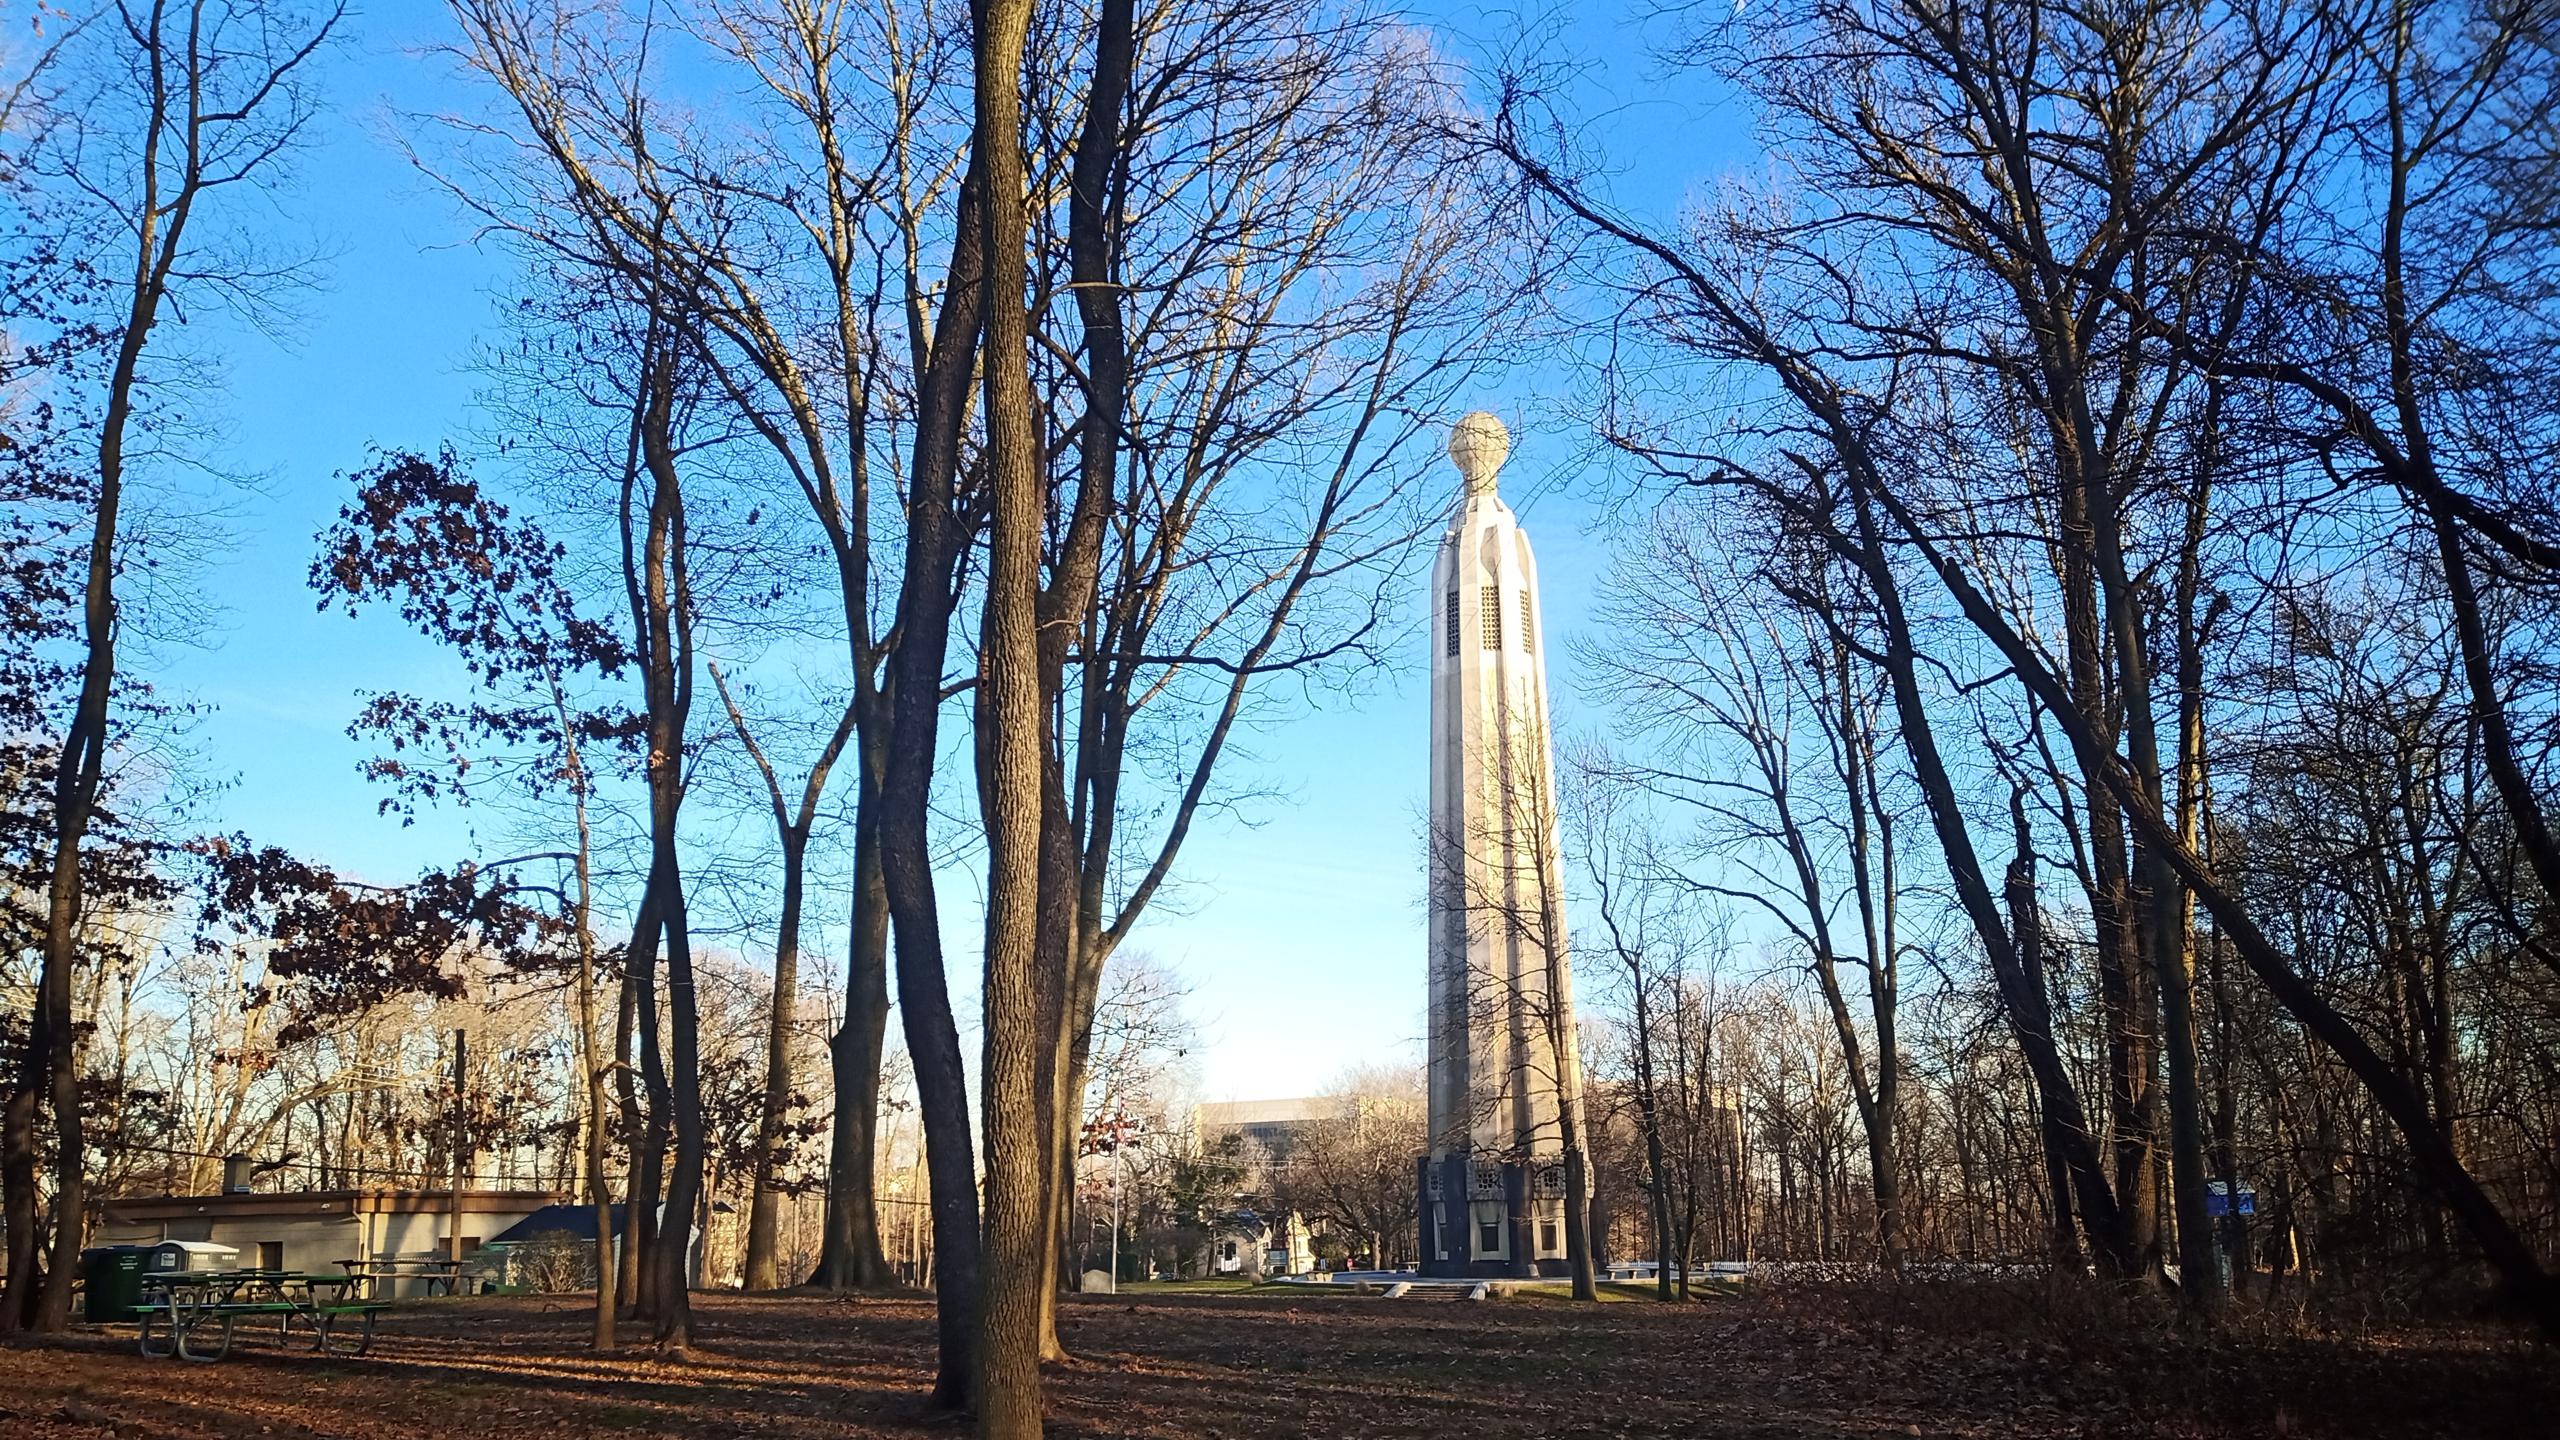 Edison Tower in Winter